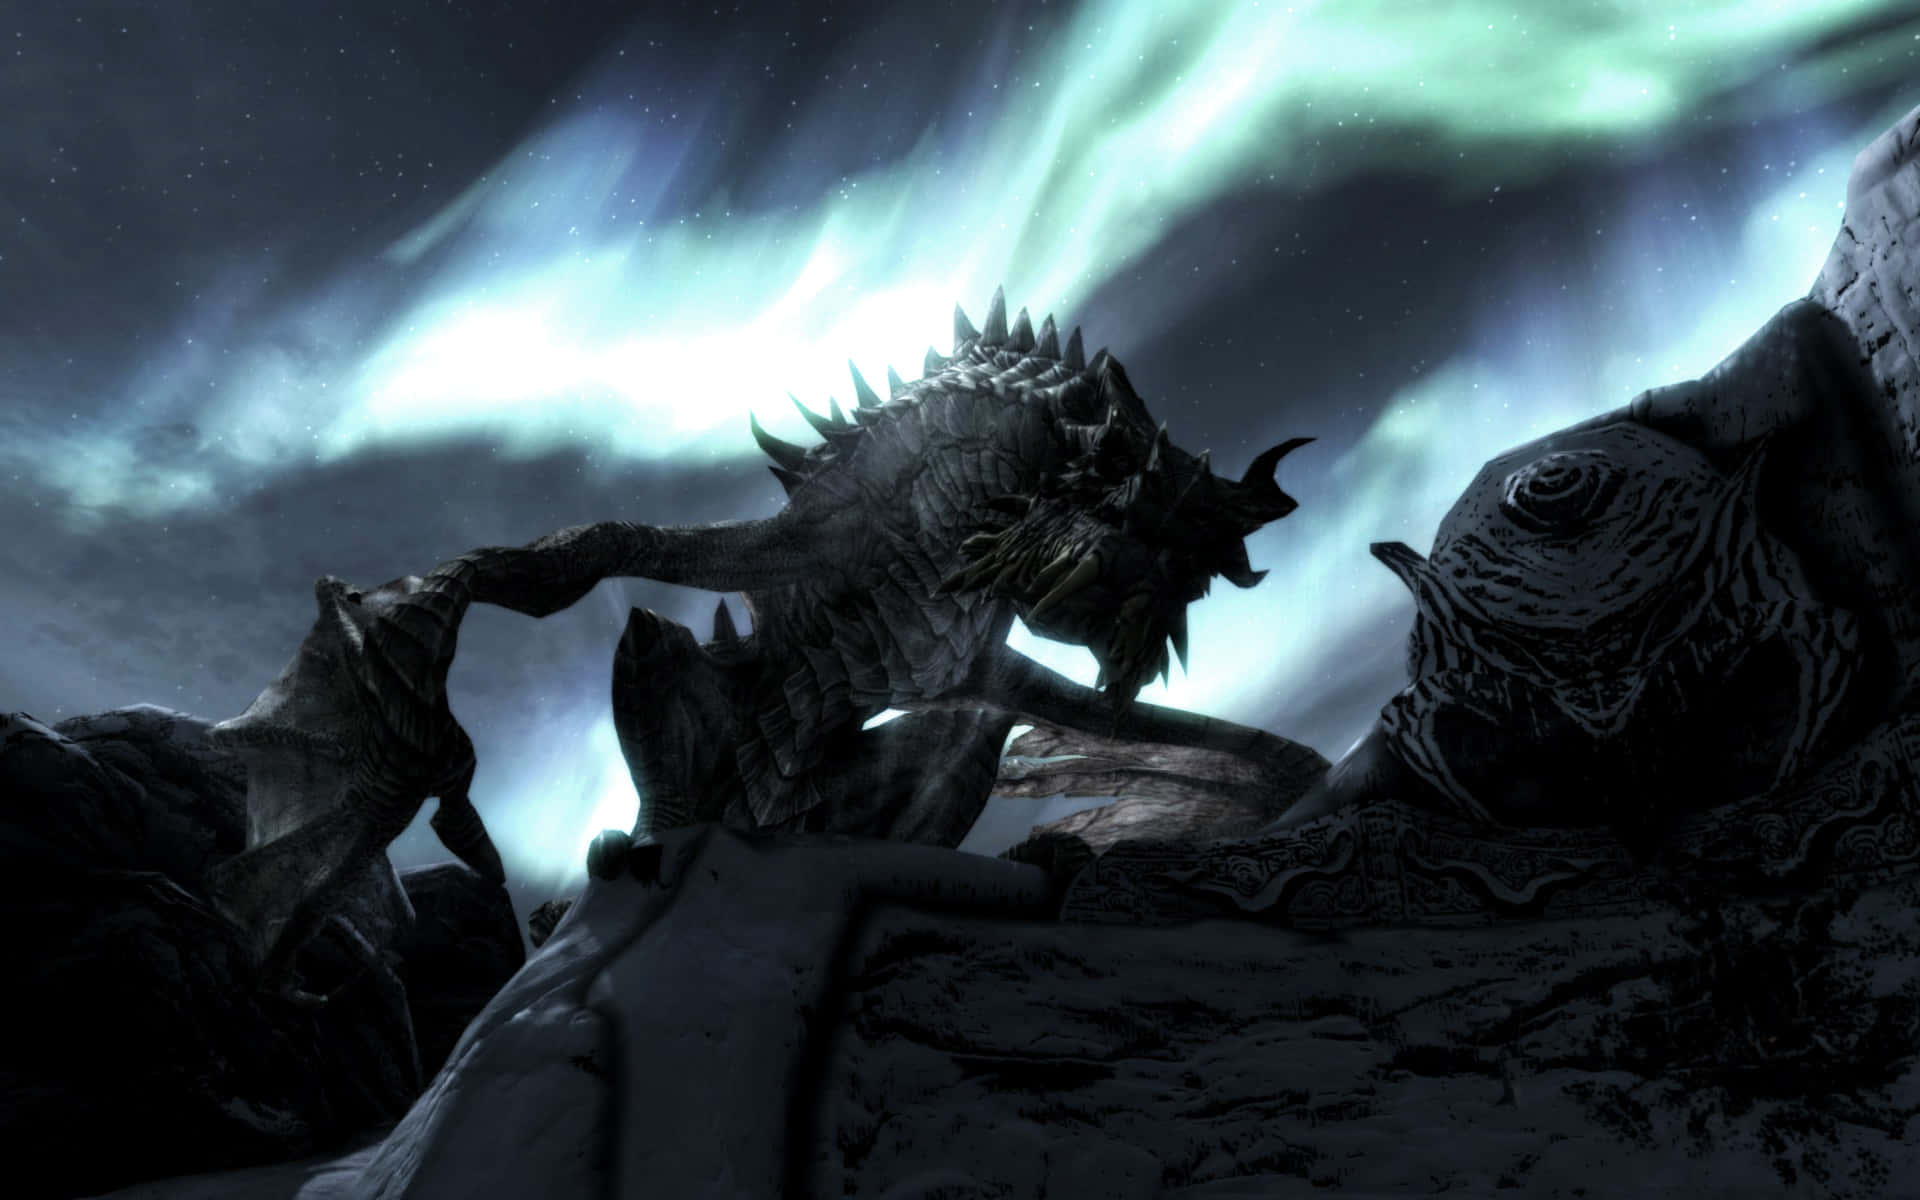 A breathtaking view of Paarthurnax, the legendary dragon from The Elder Scrolls V: Skyrim, perched upon the peak of the Throat of the World. Wallpaper